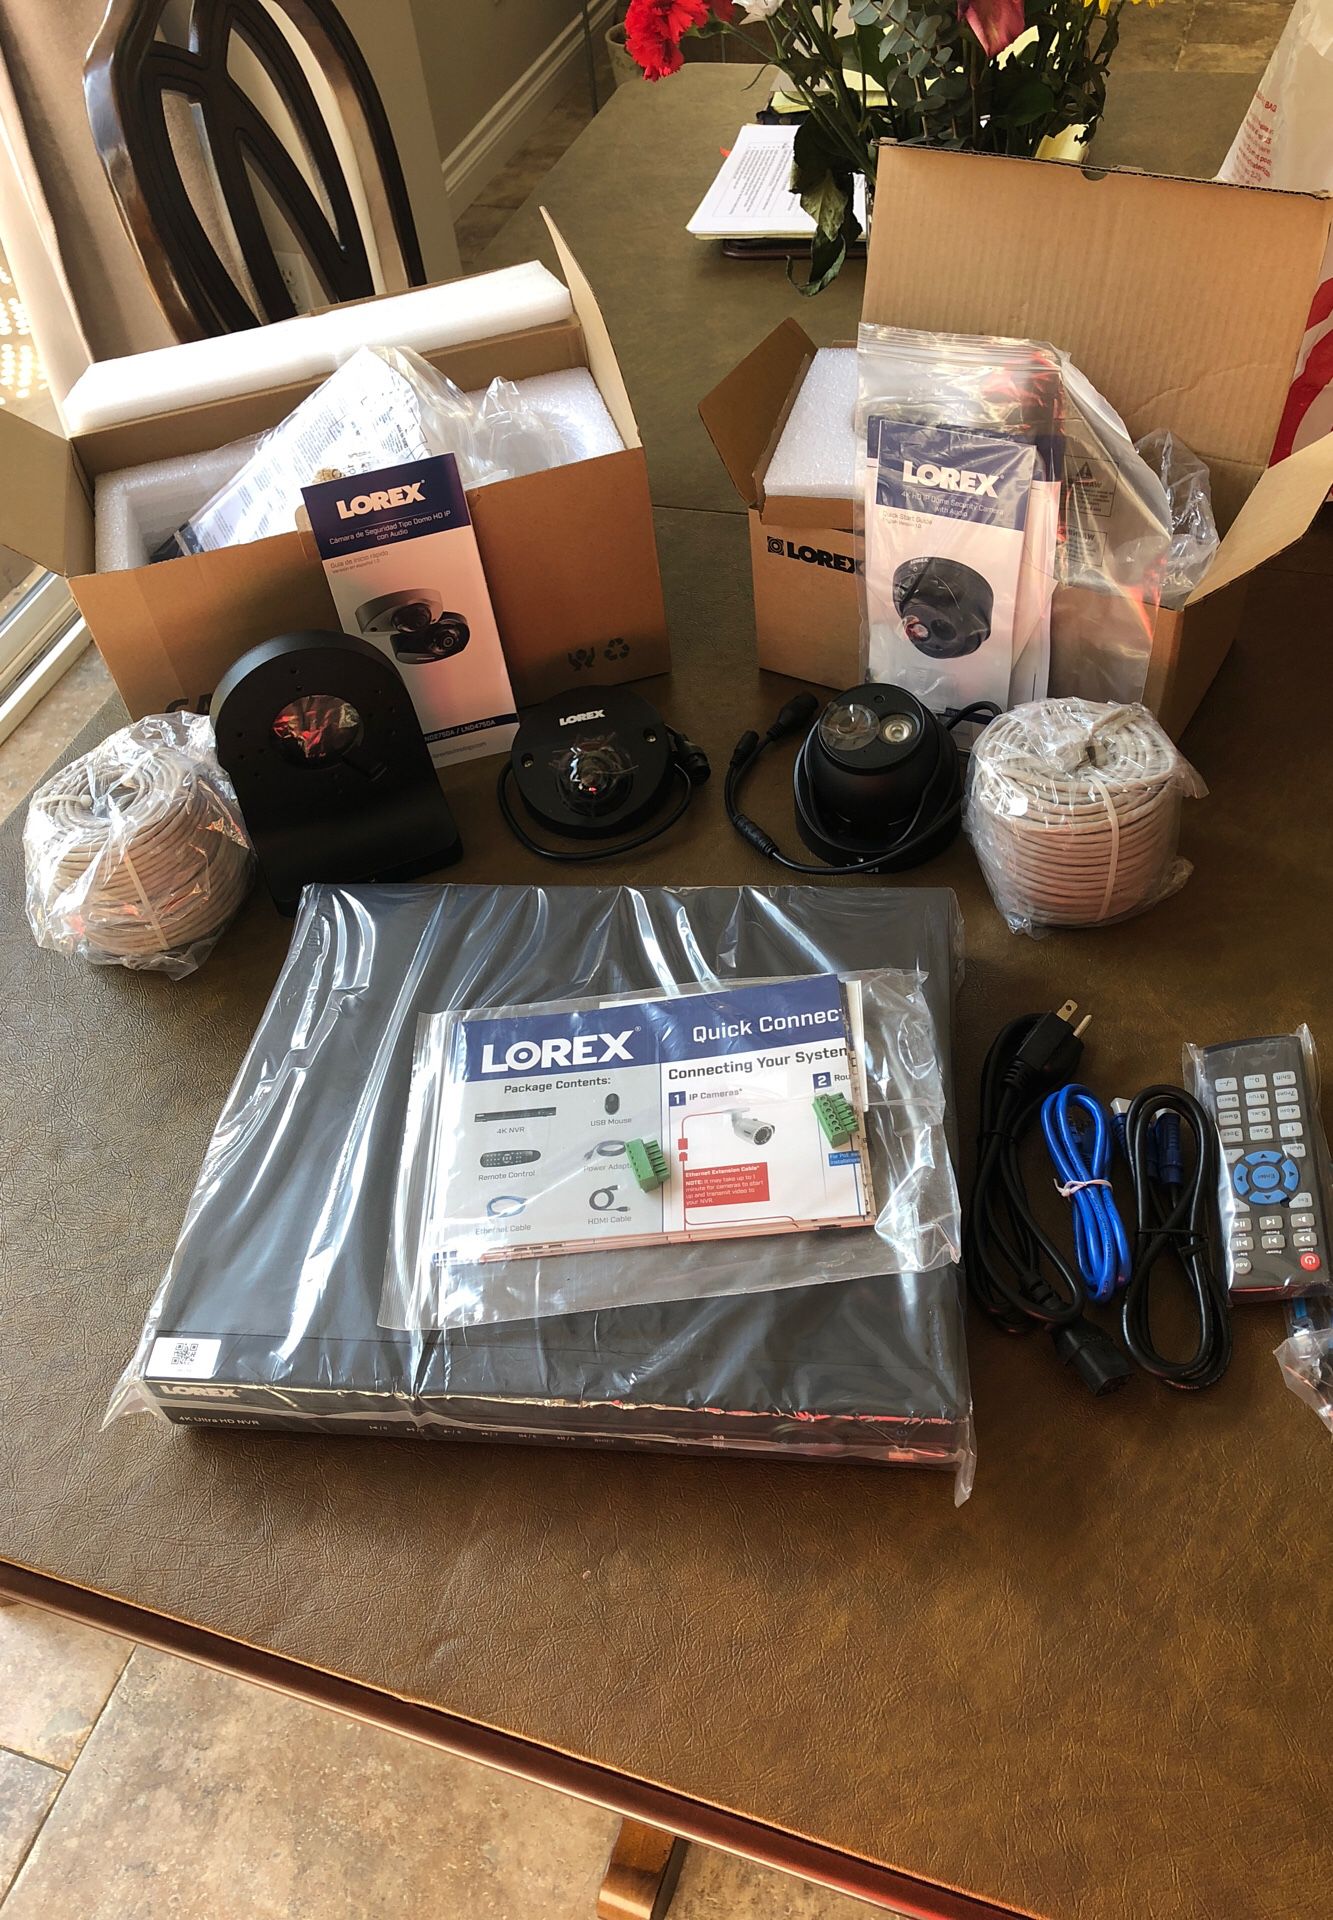 Security cameras total of six with video surveillance recorder total value over $ 1,200.00 now $350 OBO brand new never used